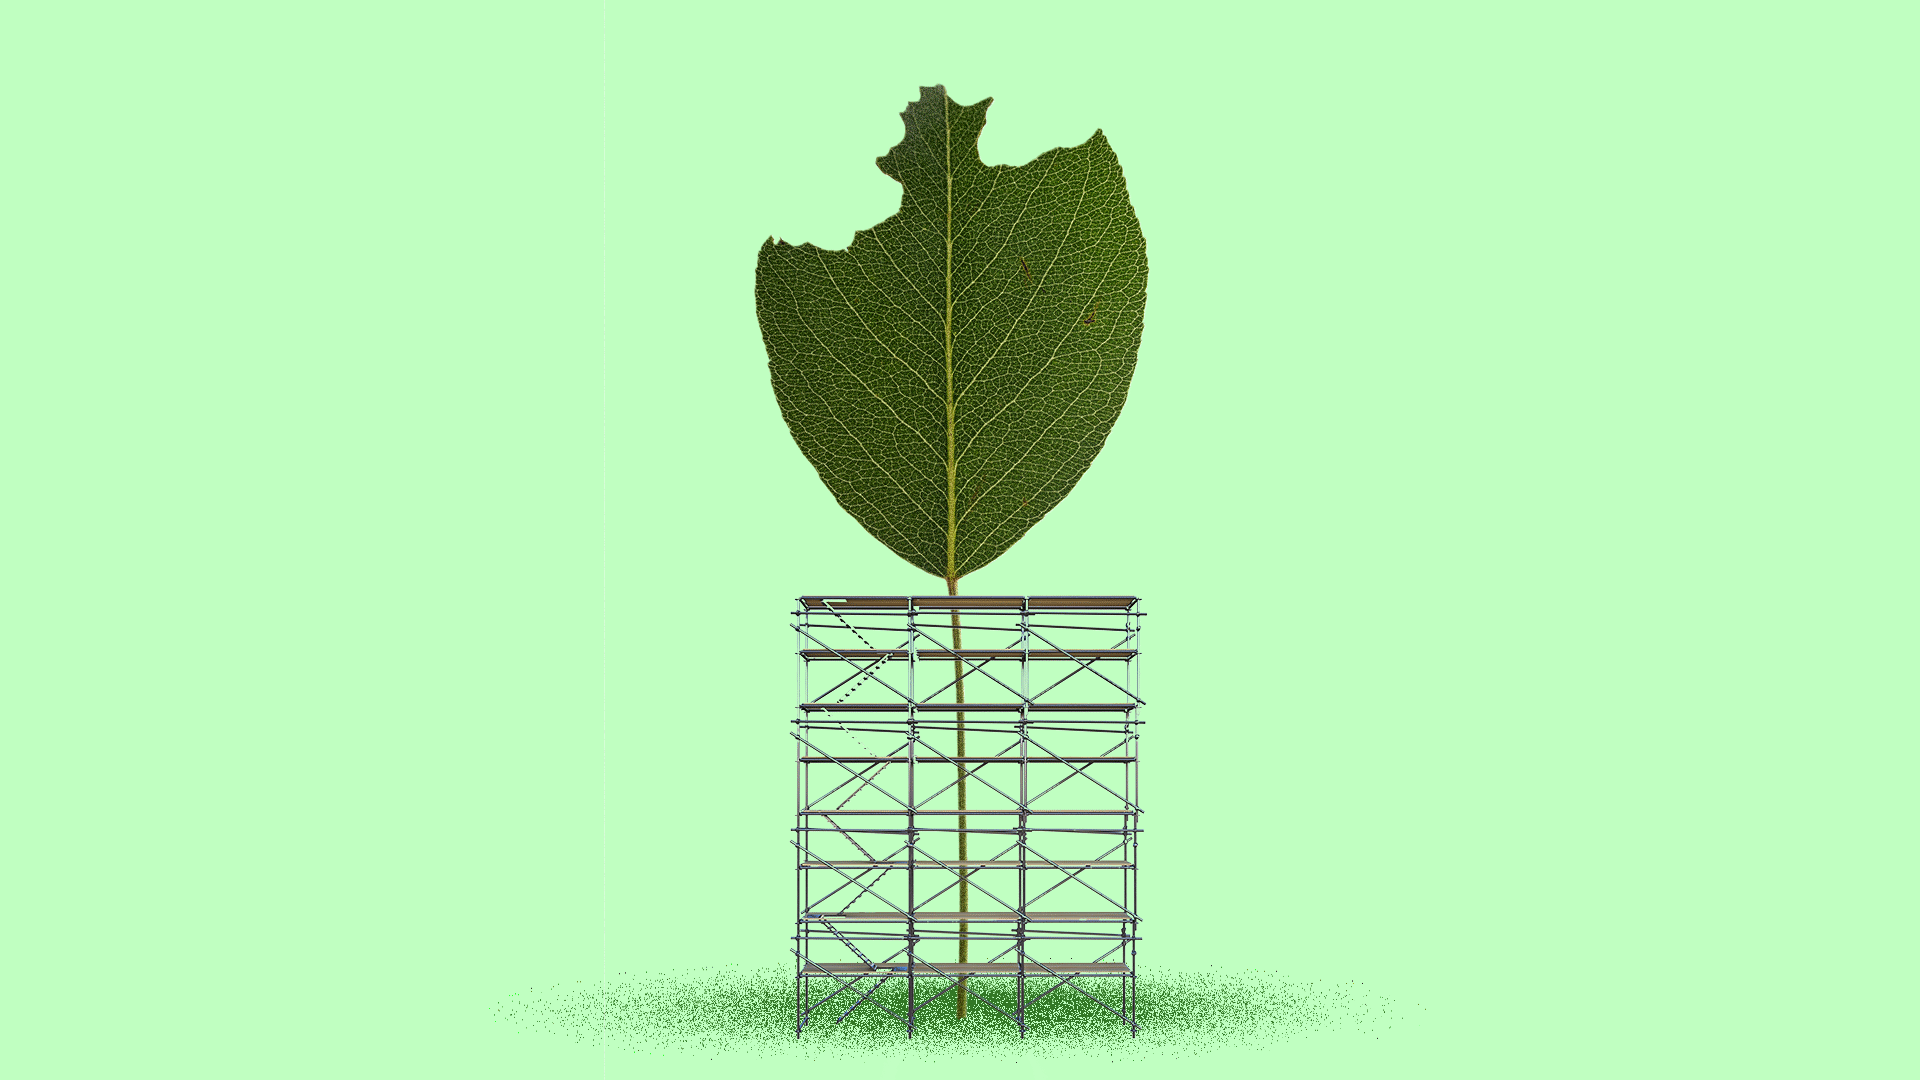 Illustration of a damaged leaf with scaffolding around it